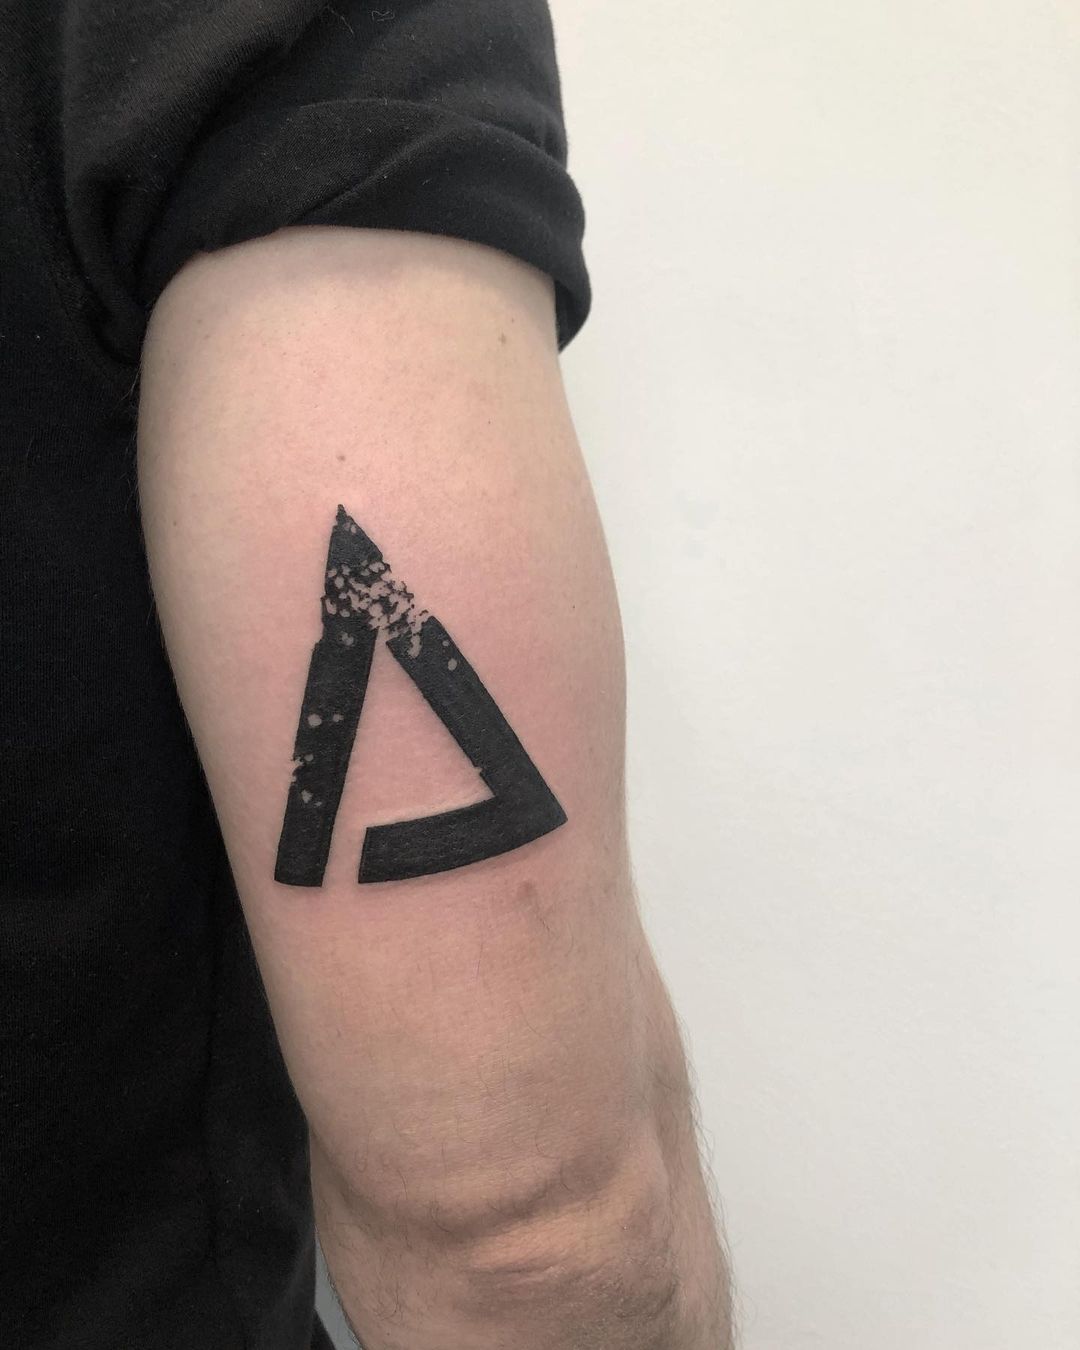 Delta tattoo meaning and symbolism 